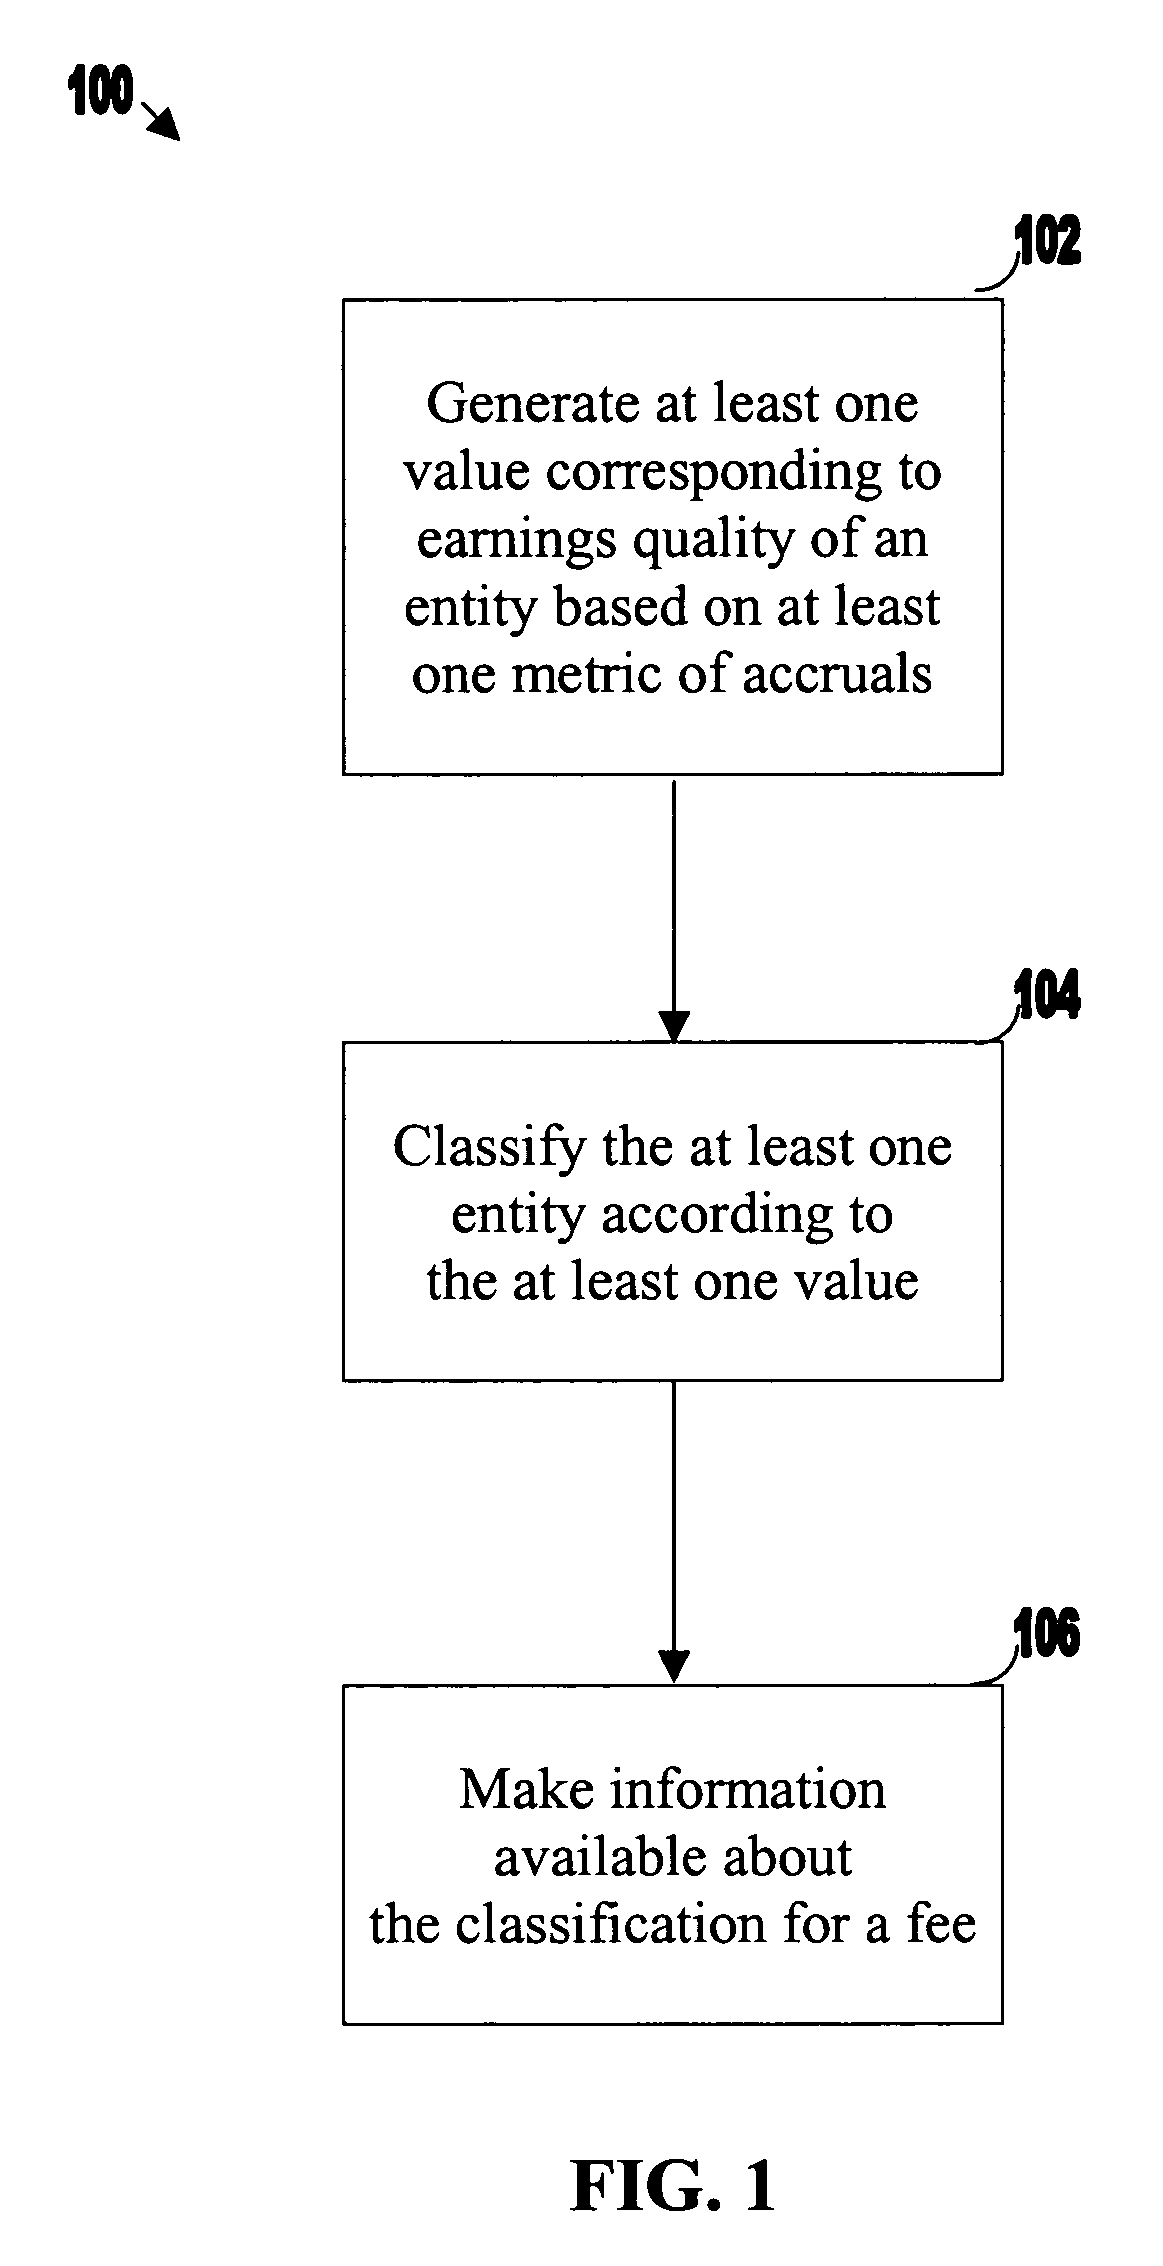 Methods and systems for classifying entities according to metrics of earnings quality